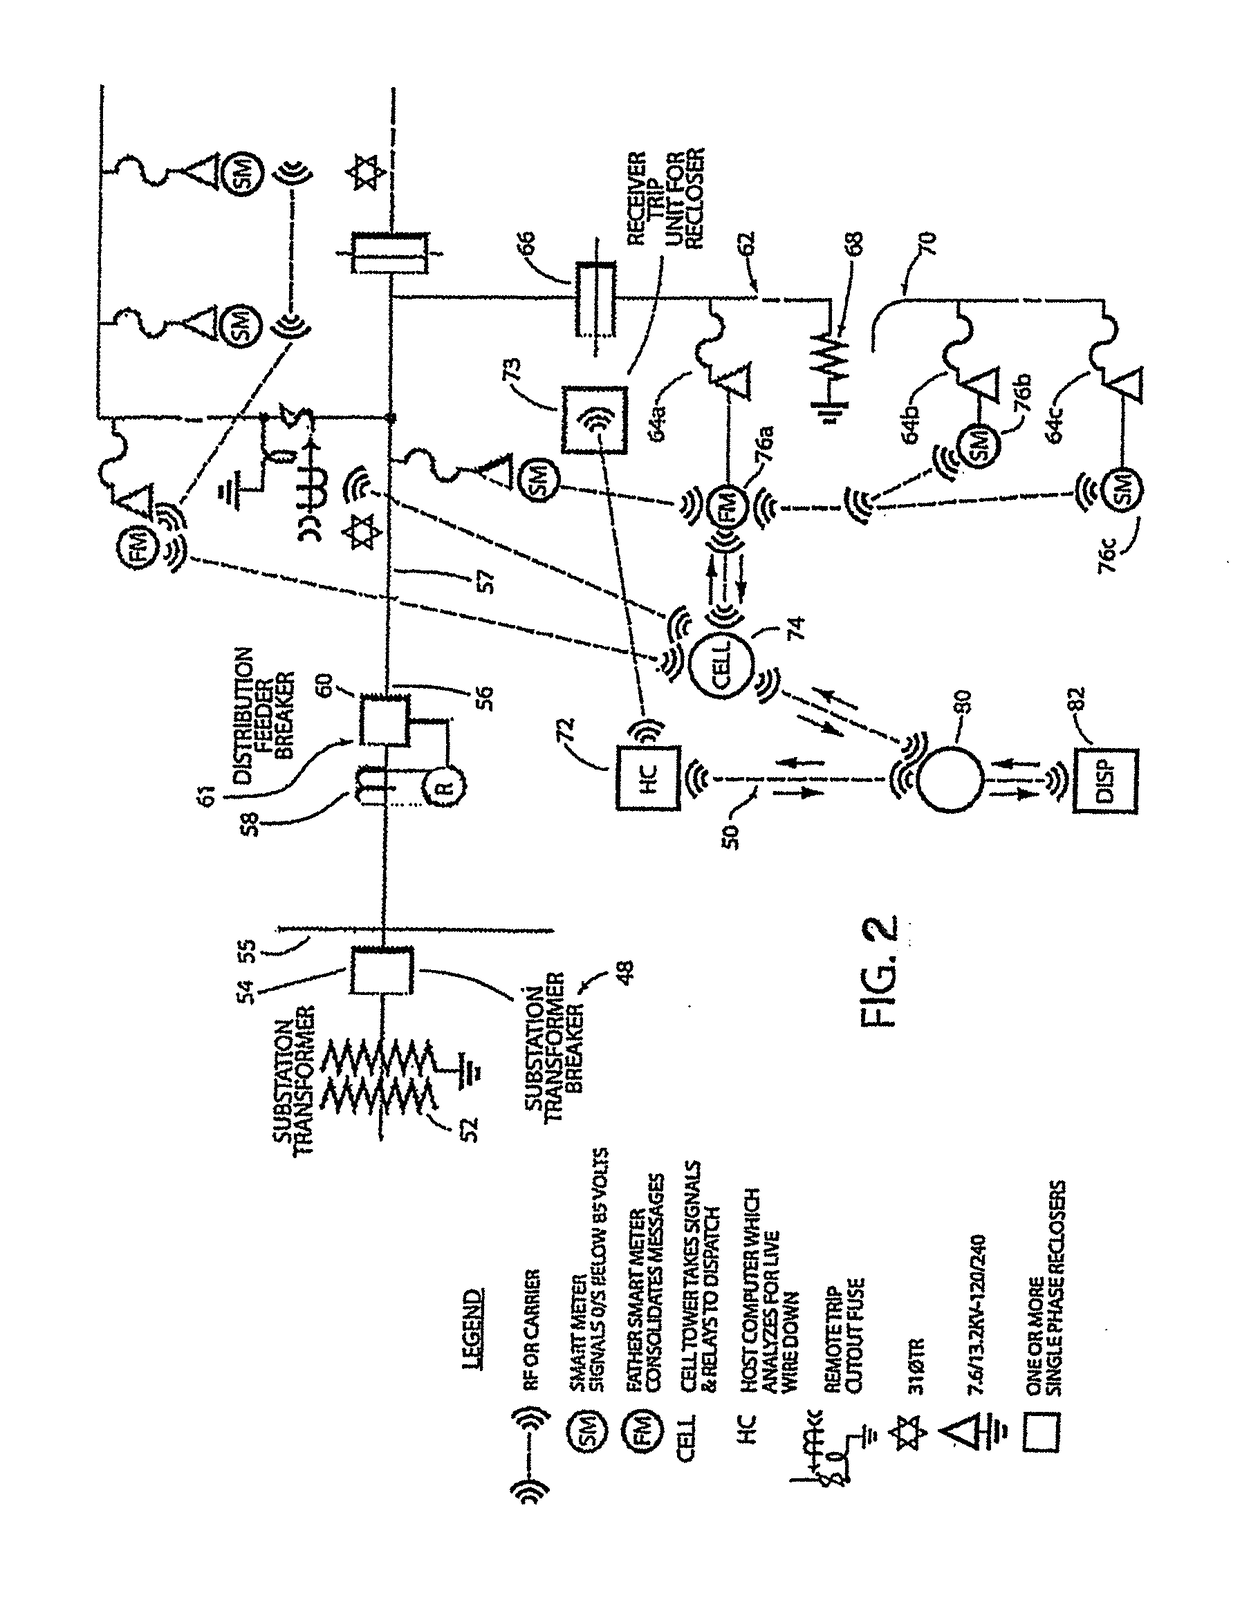 Localized application of high impedance fault isolation in multi-tap electrical power distribution system